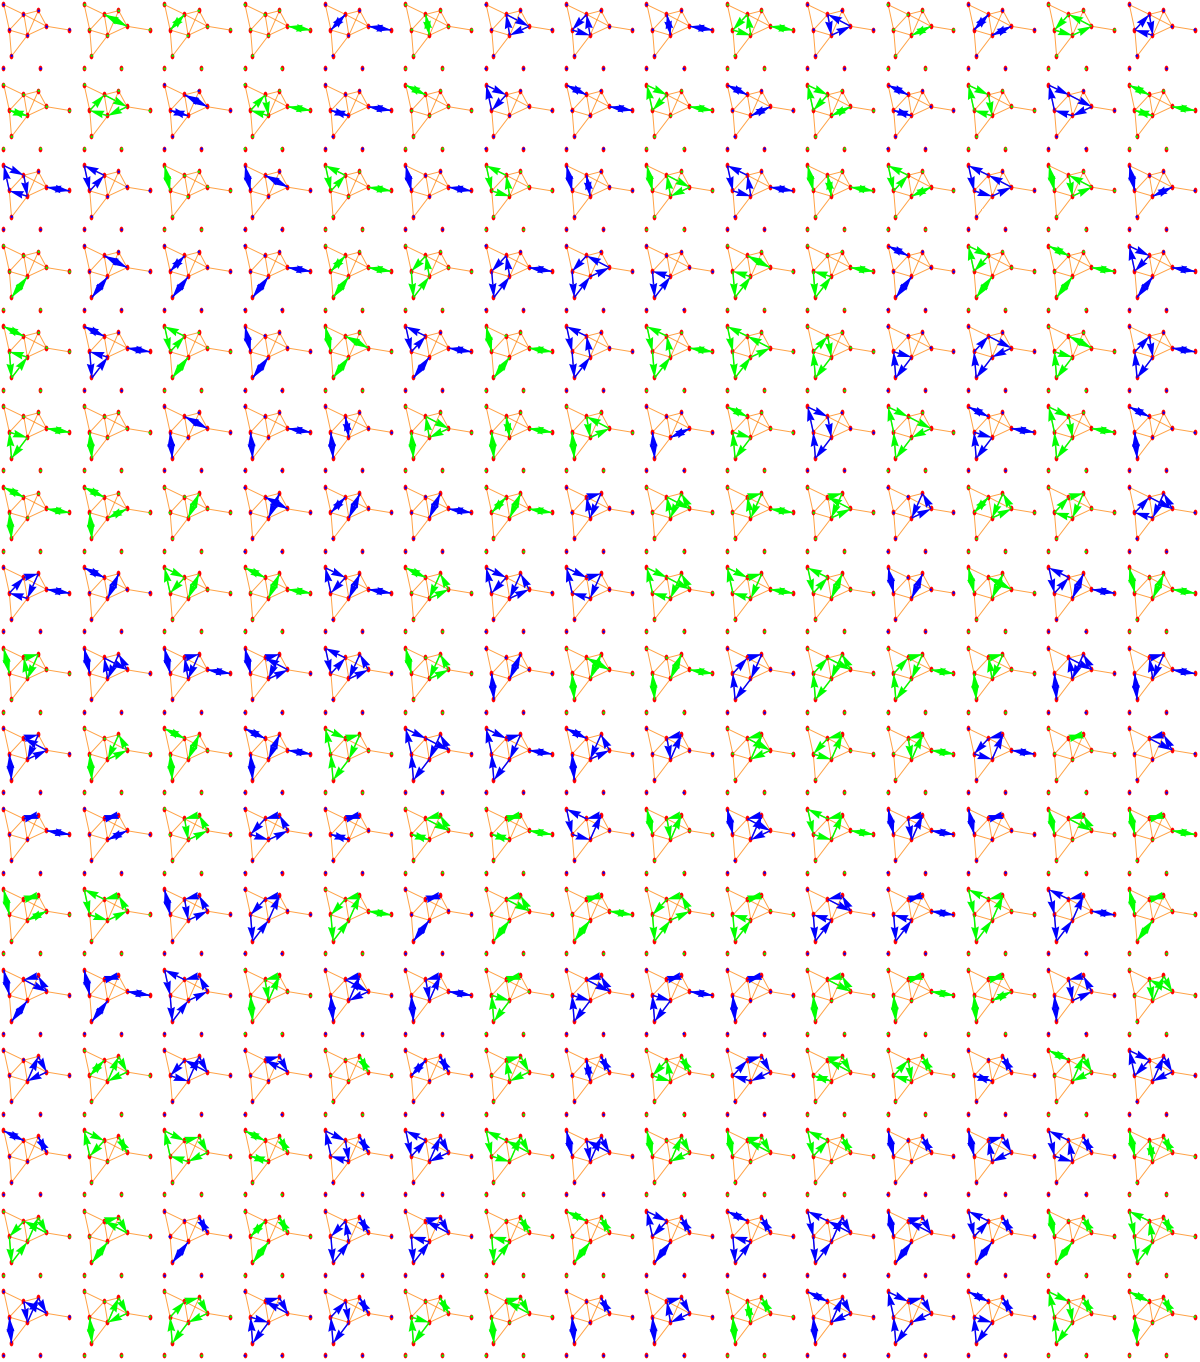 all 255 one dimensional closed sub graphs of the connection prime graph with n=15.